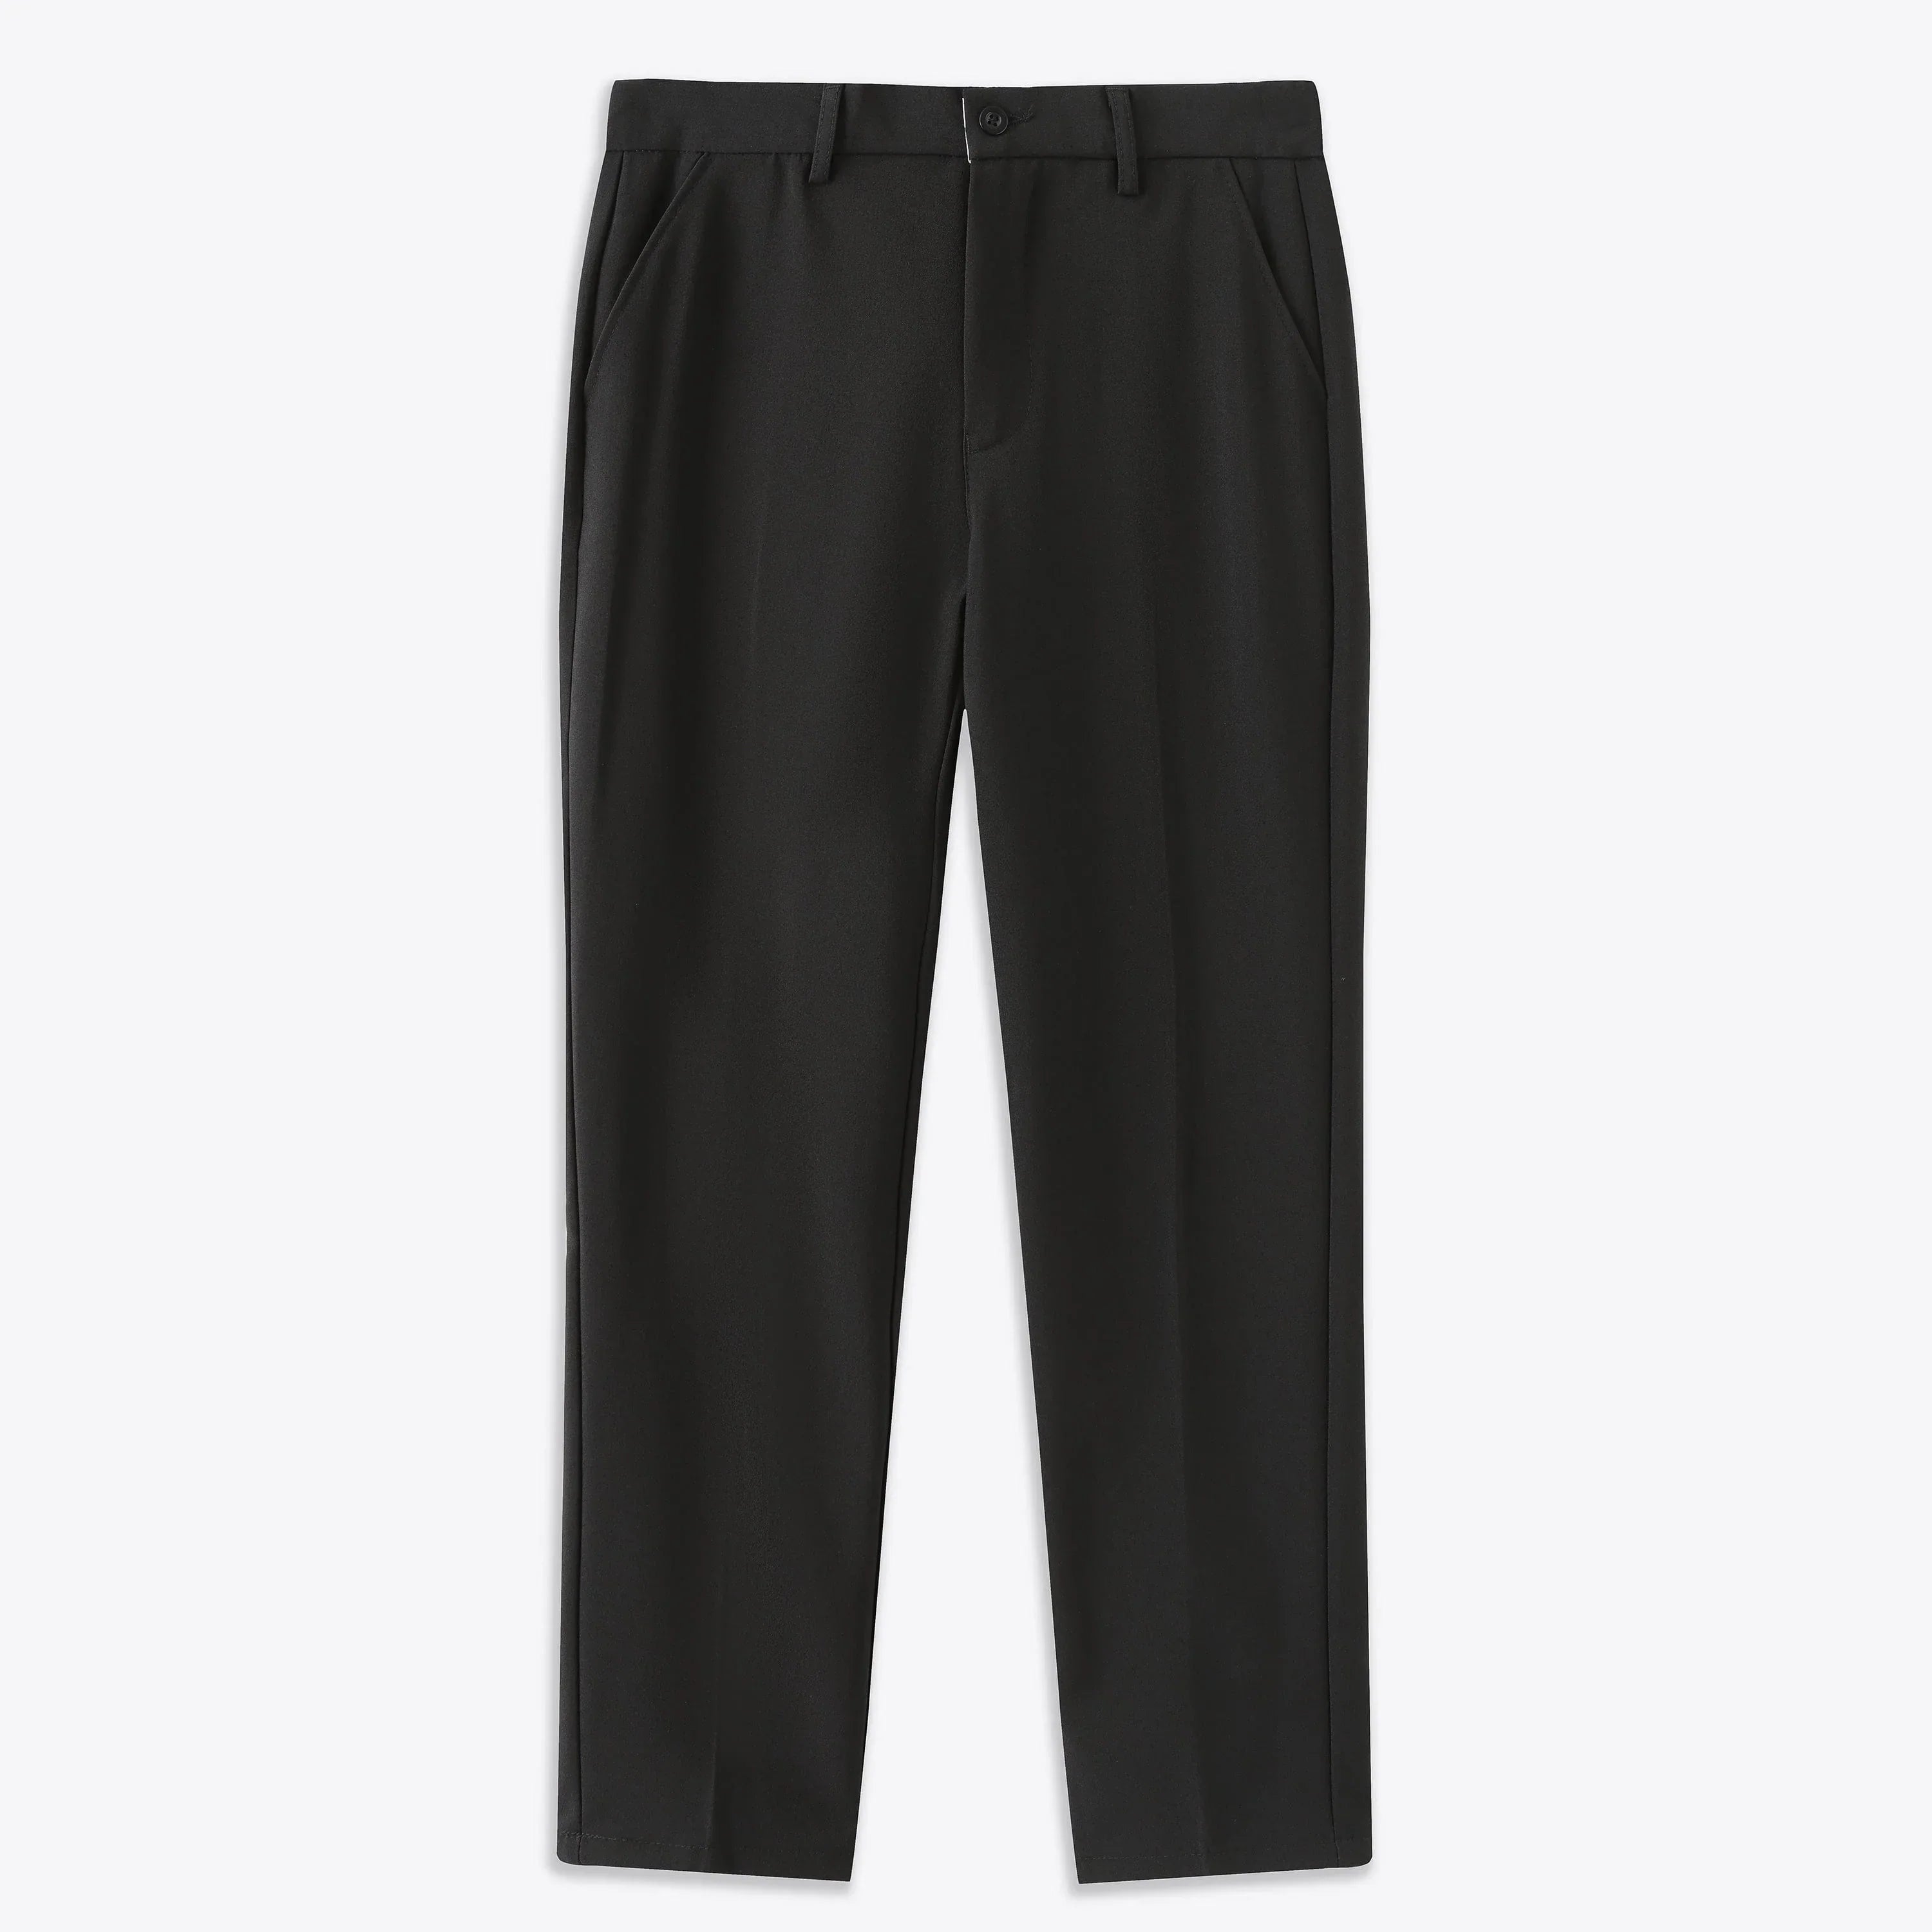 Augusto Stretch Pants